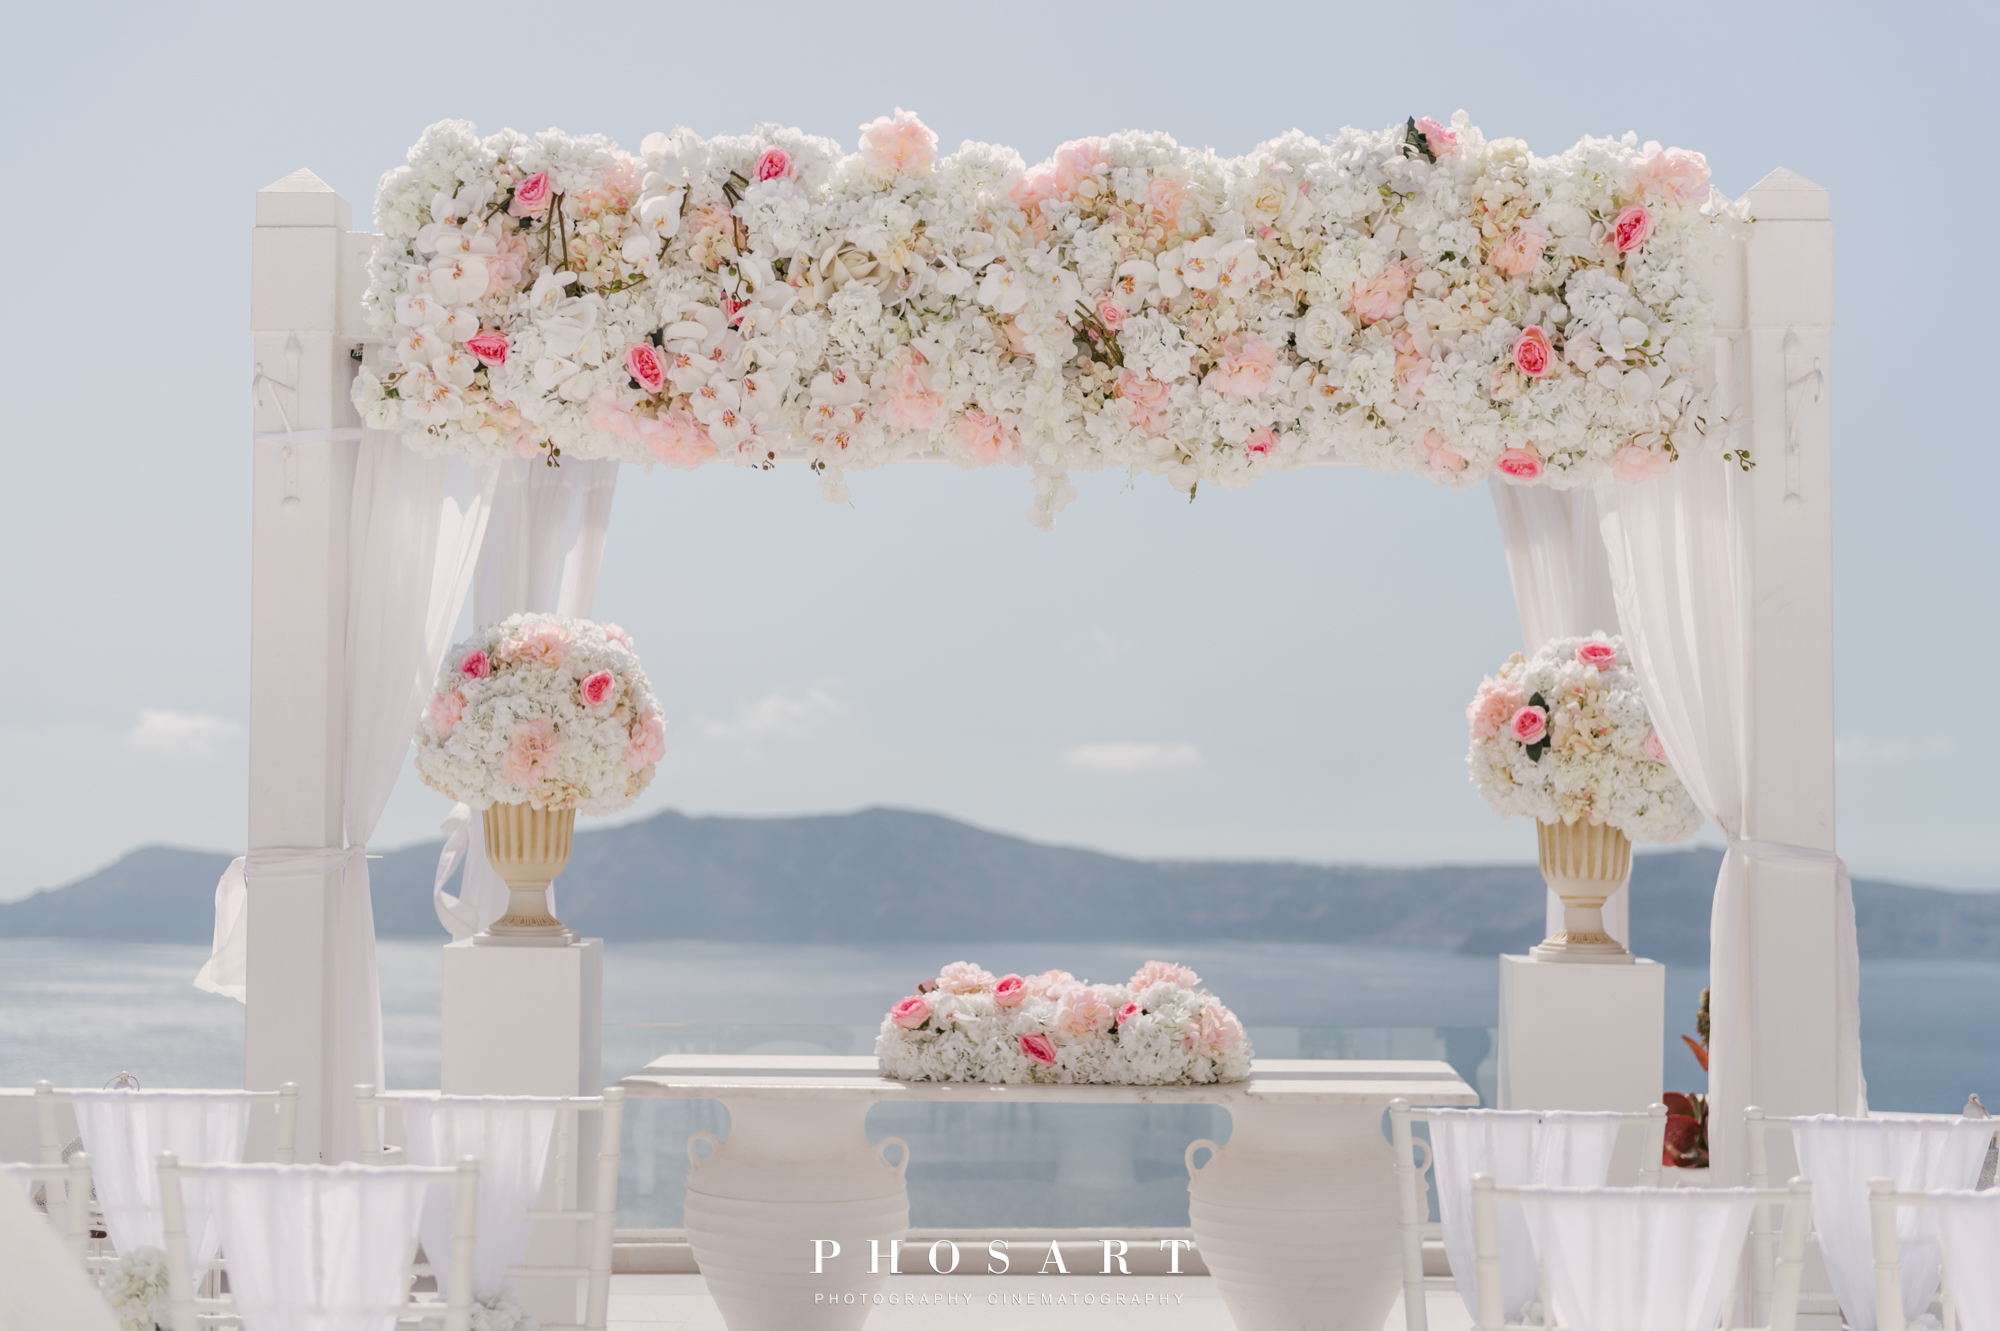 a white wooden kiosk overlooking the Aegean, decorated with white flowers and wooden white empty chairs before the wedding ceremony